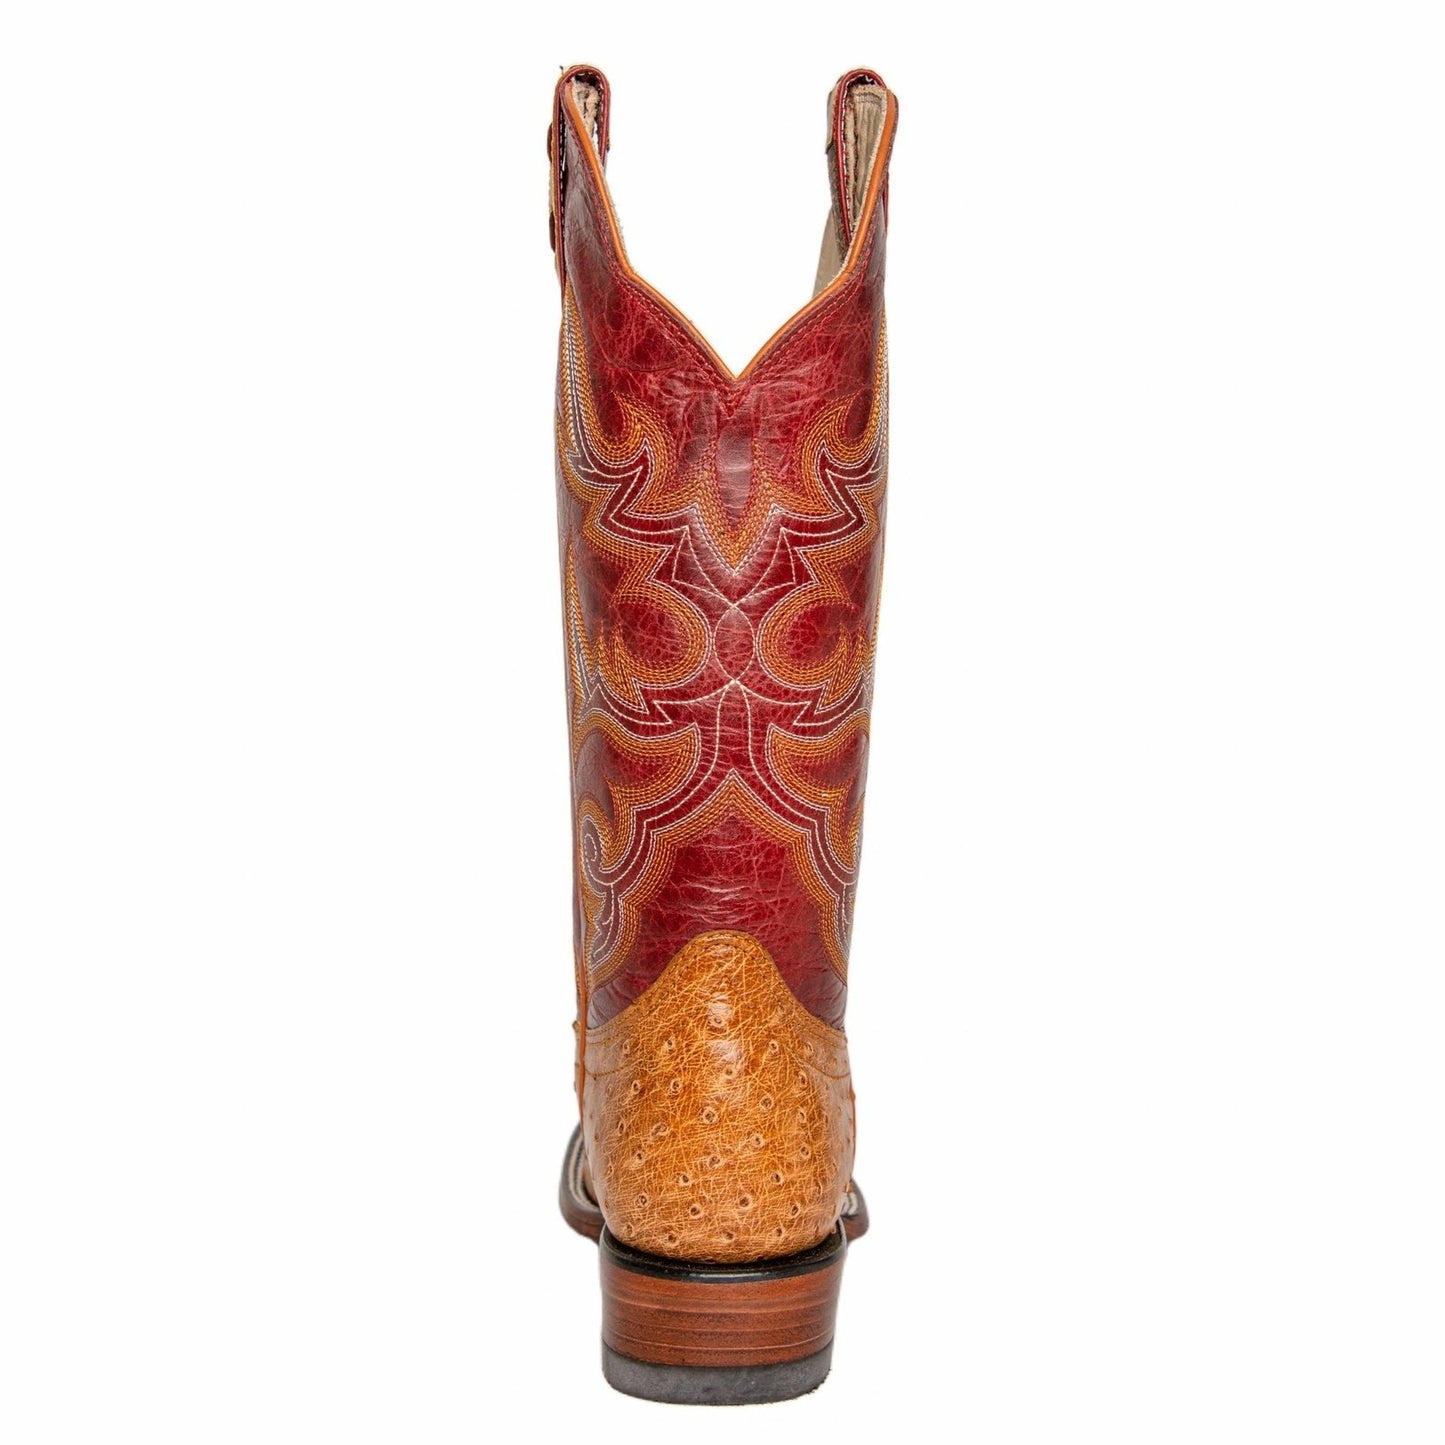 Hondo Women’s Cowgirl Boots 13" Umber Exotic Ostrich 3321L - Hondo Boots